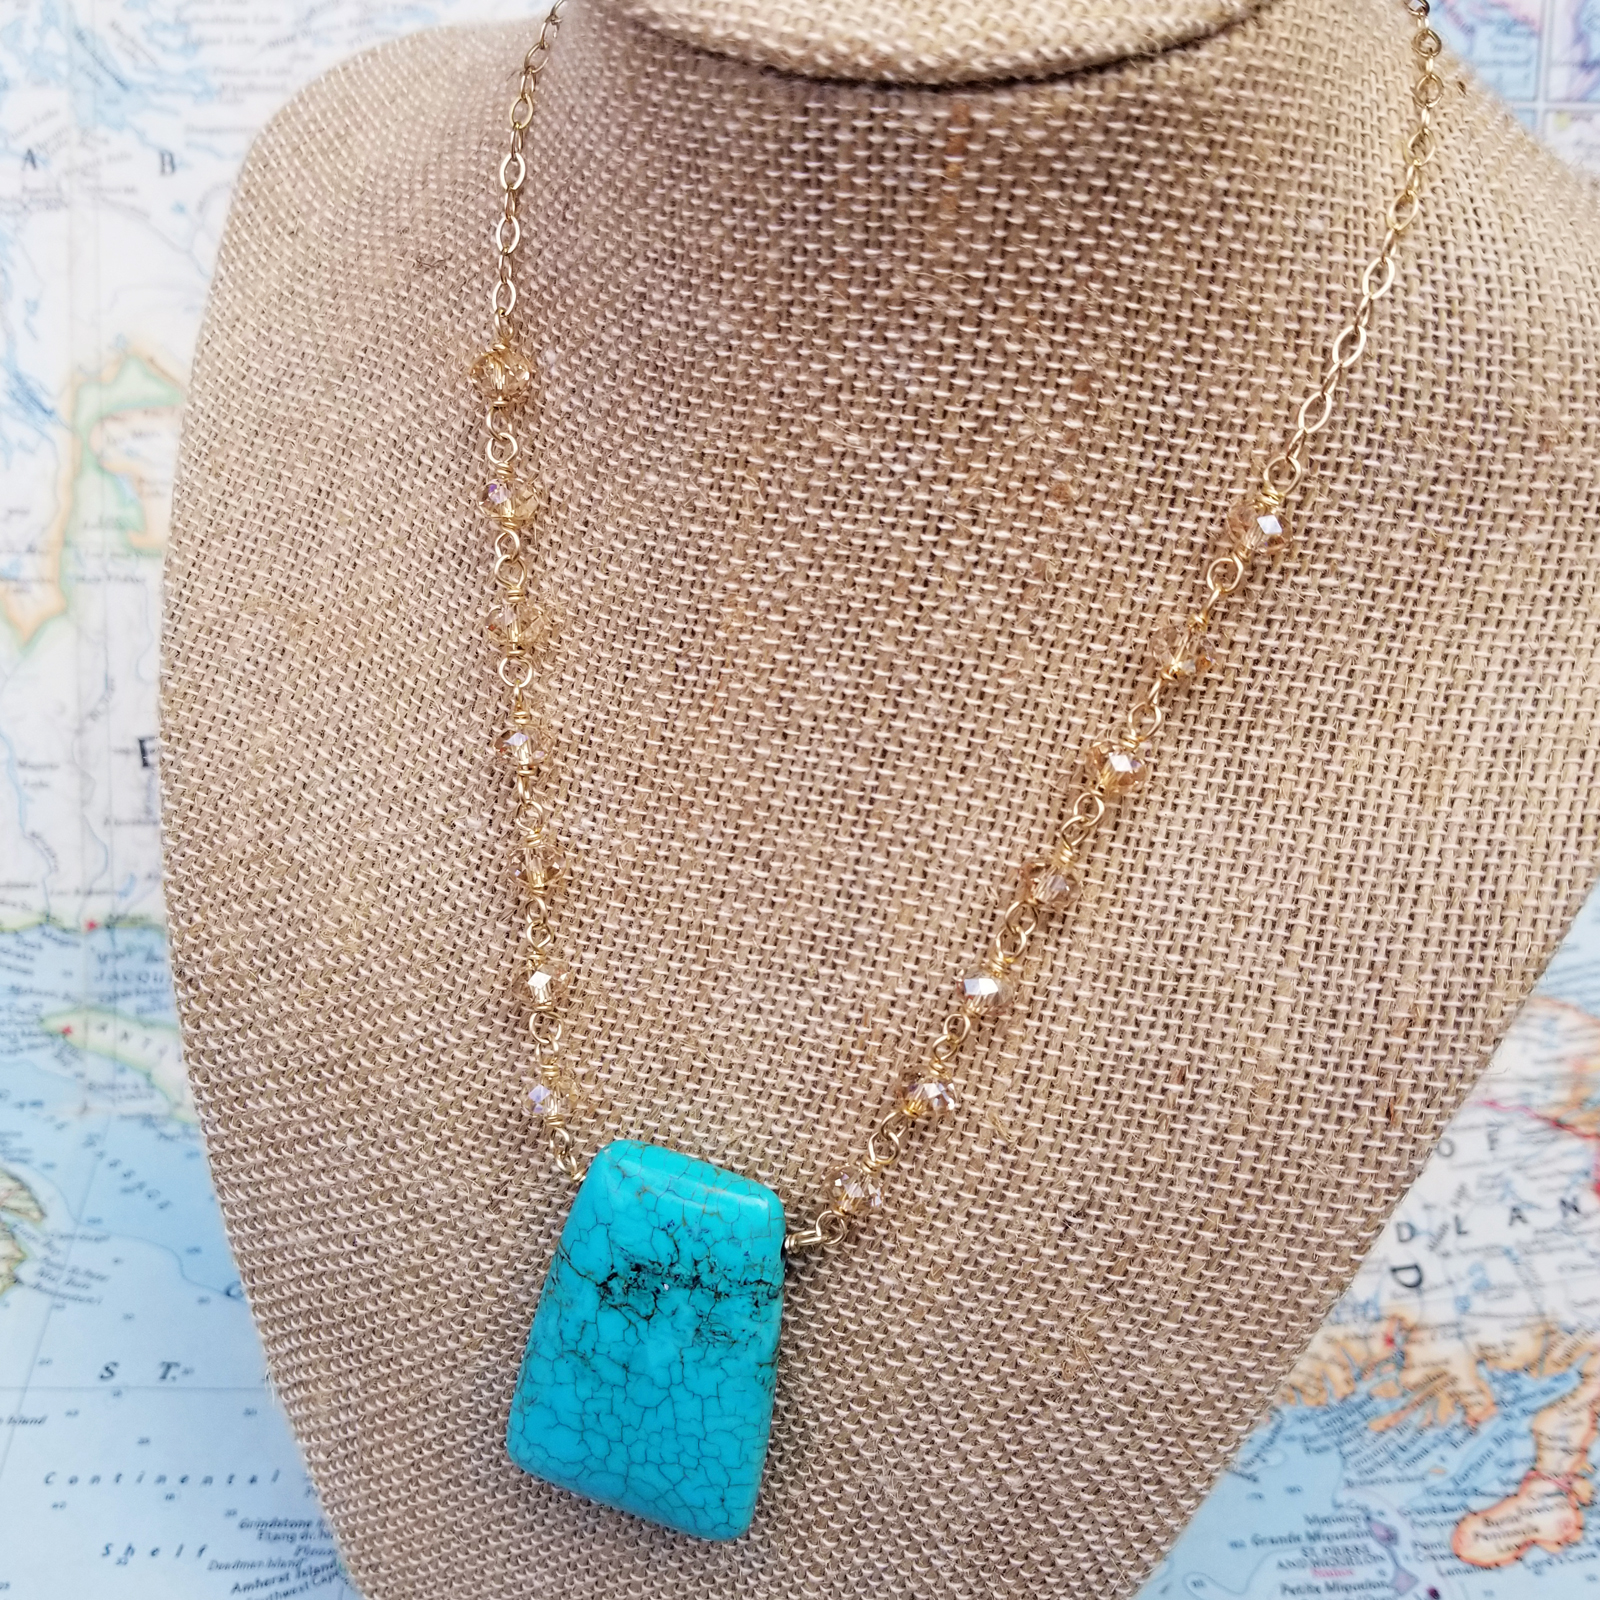 Mermaid Jewel Turquoise, Crystal and Gold Necklace